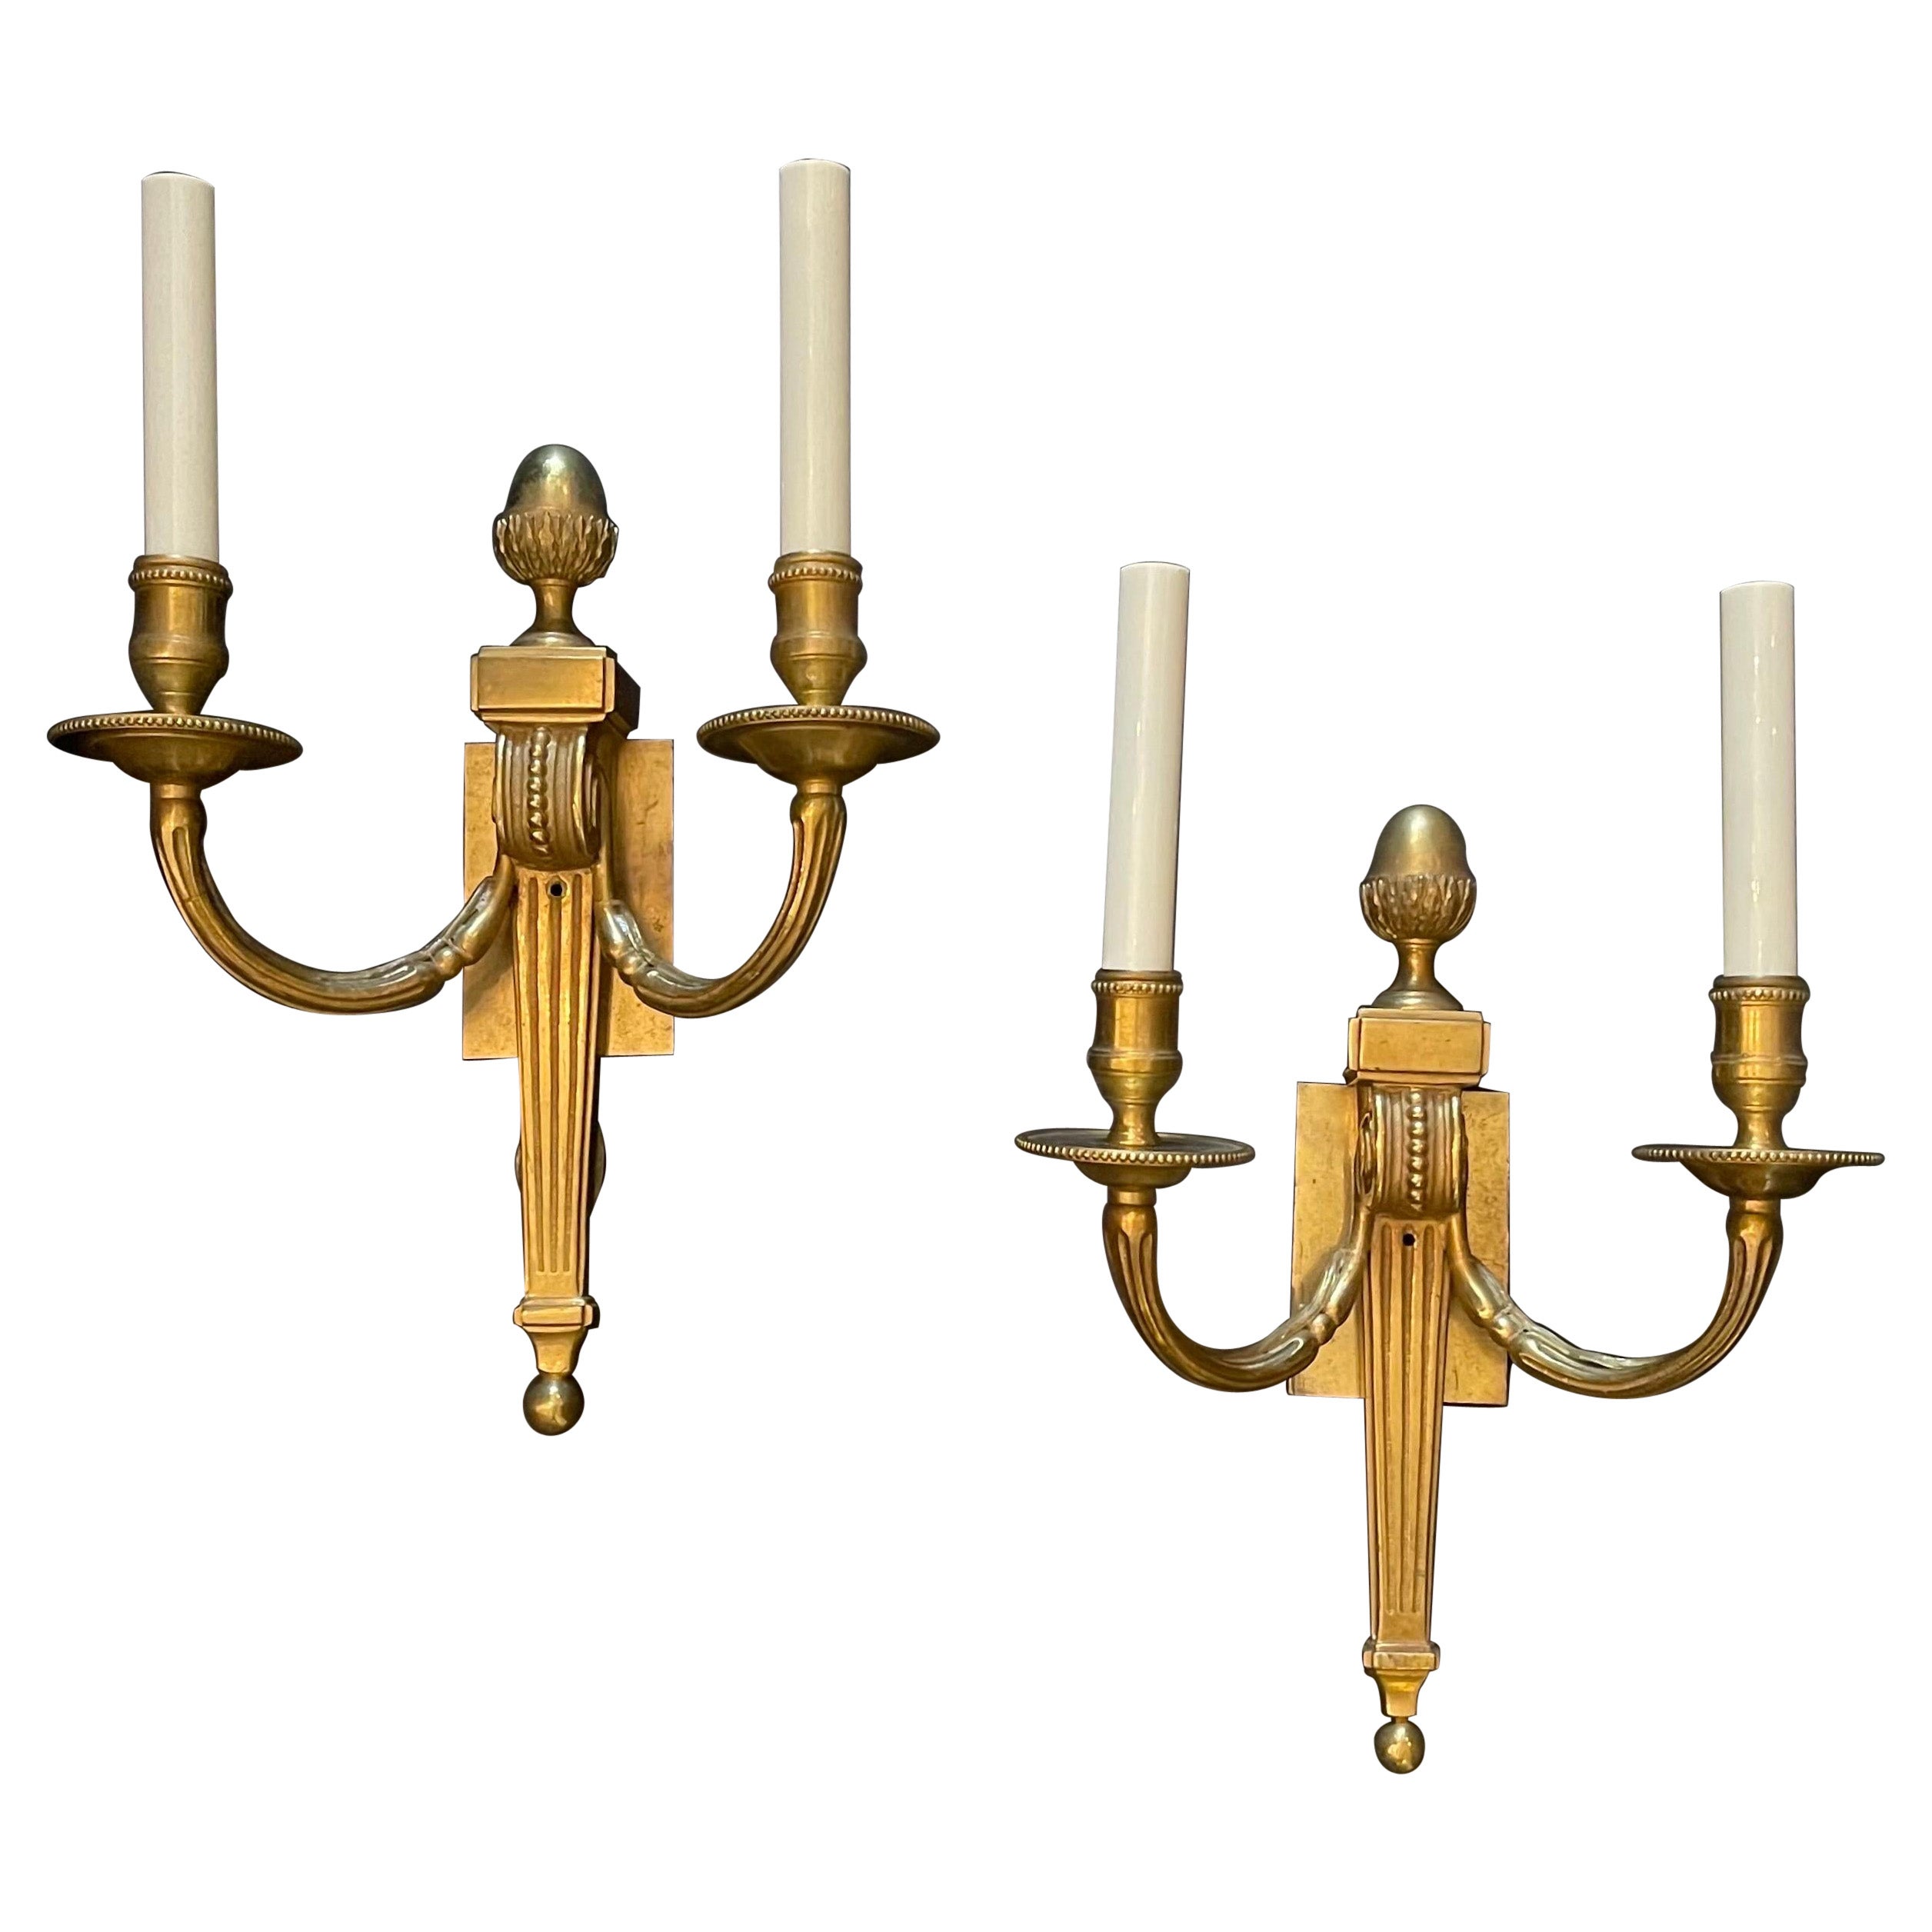 Wonderful French Empire Neoclassical Bronze Urn Caldwell Two Candelabra Sconces For Sale